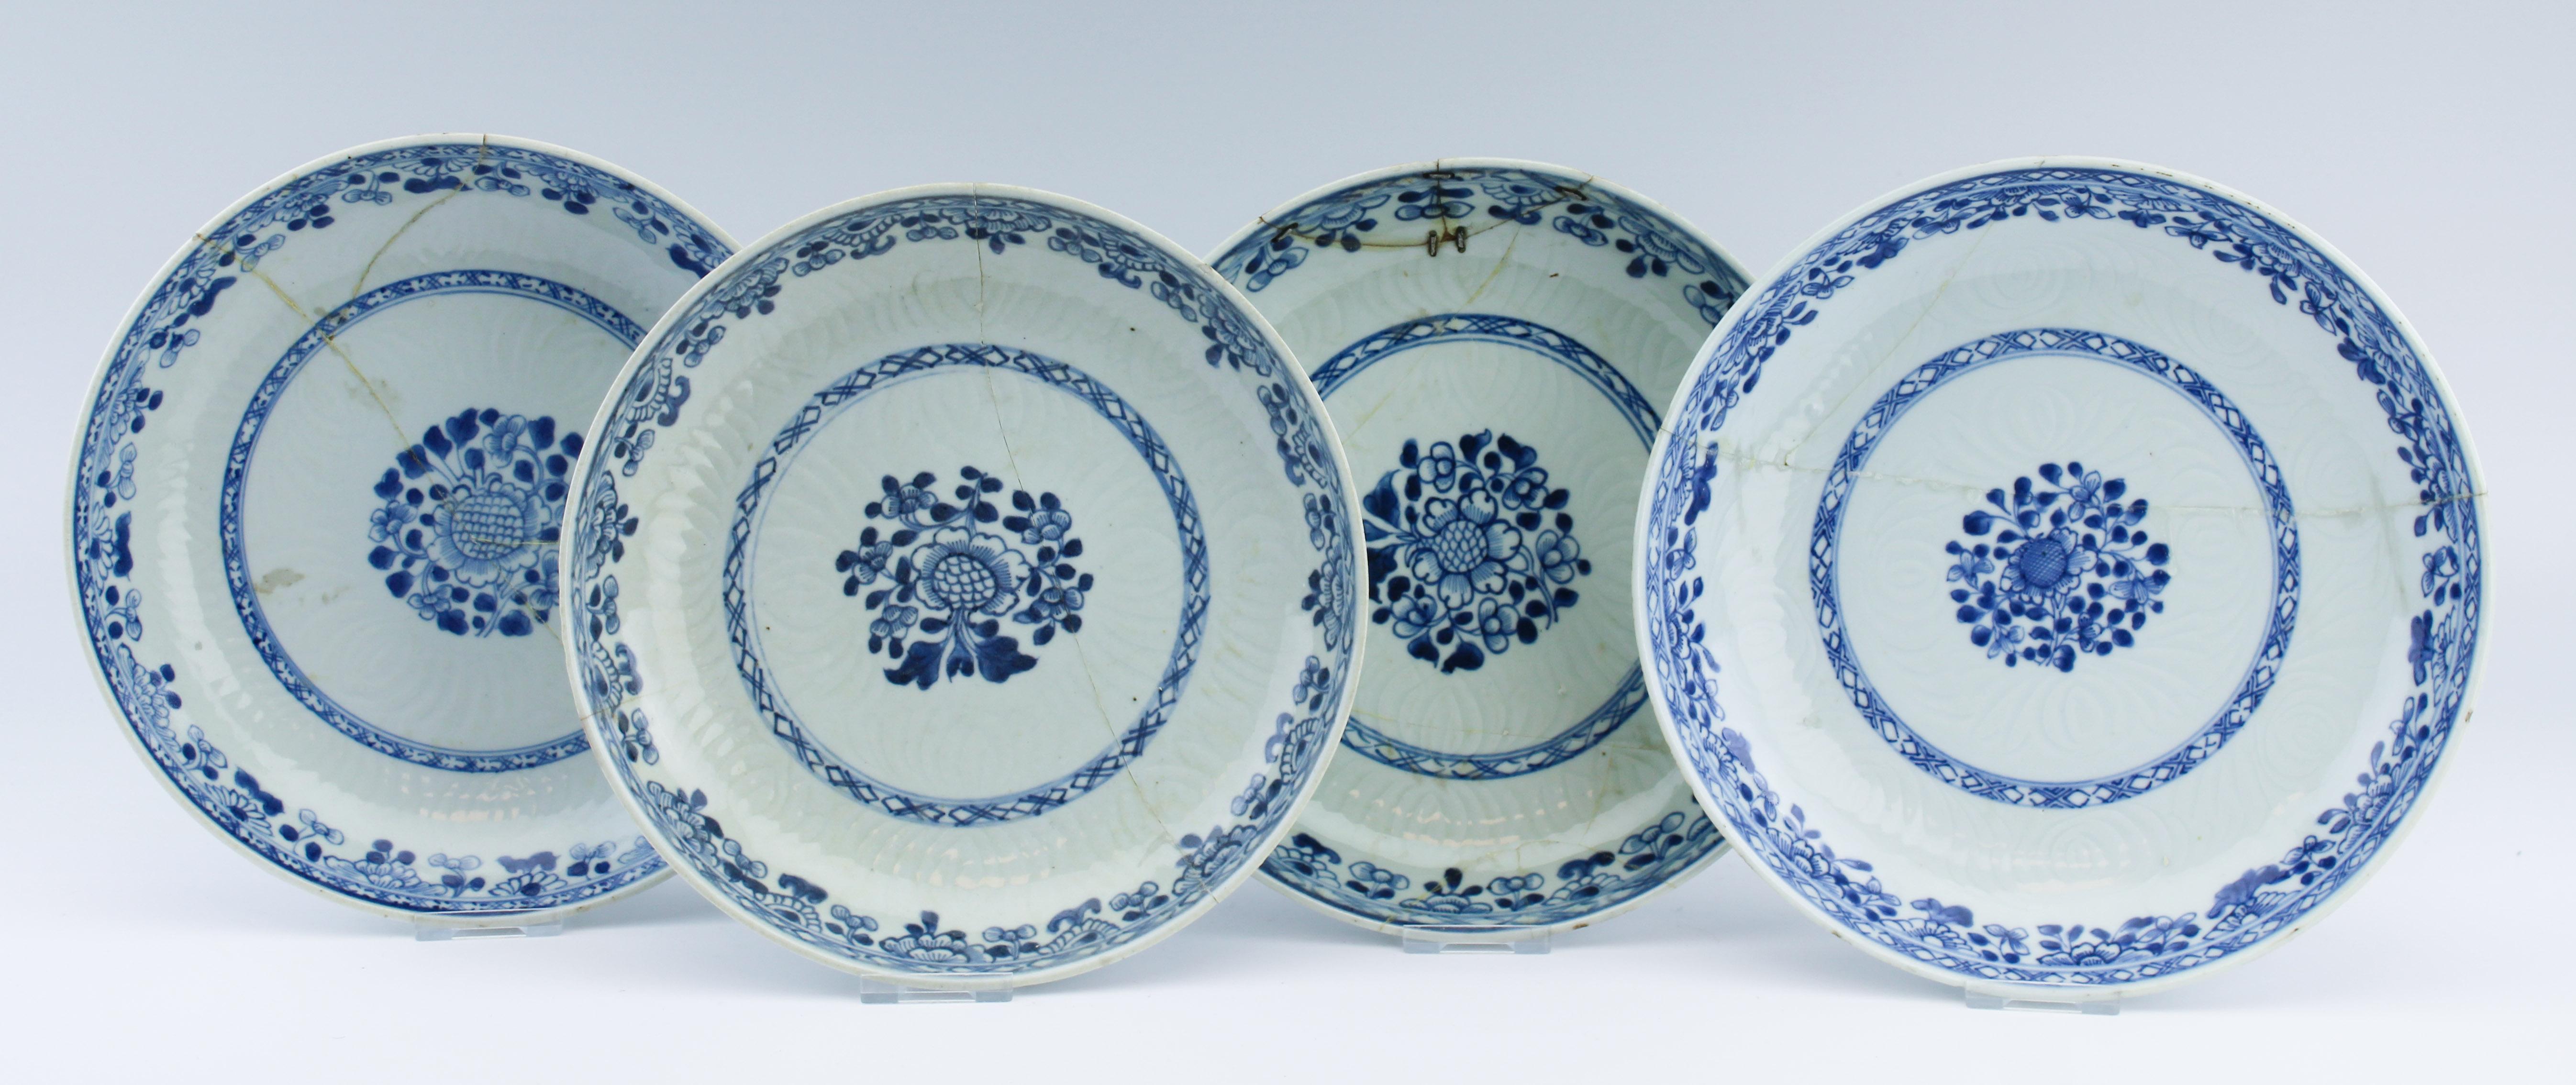 #10 Antique Chinese Porcelain 18th C Yongzheng/Qianlong Kraak Blue White dinner In Good Condition For Sale In Amsterdam, Noord Holland